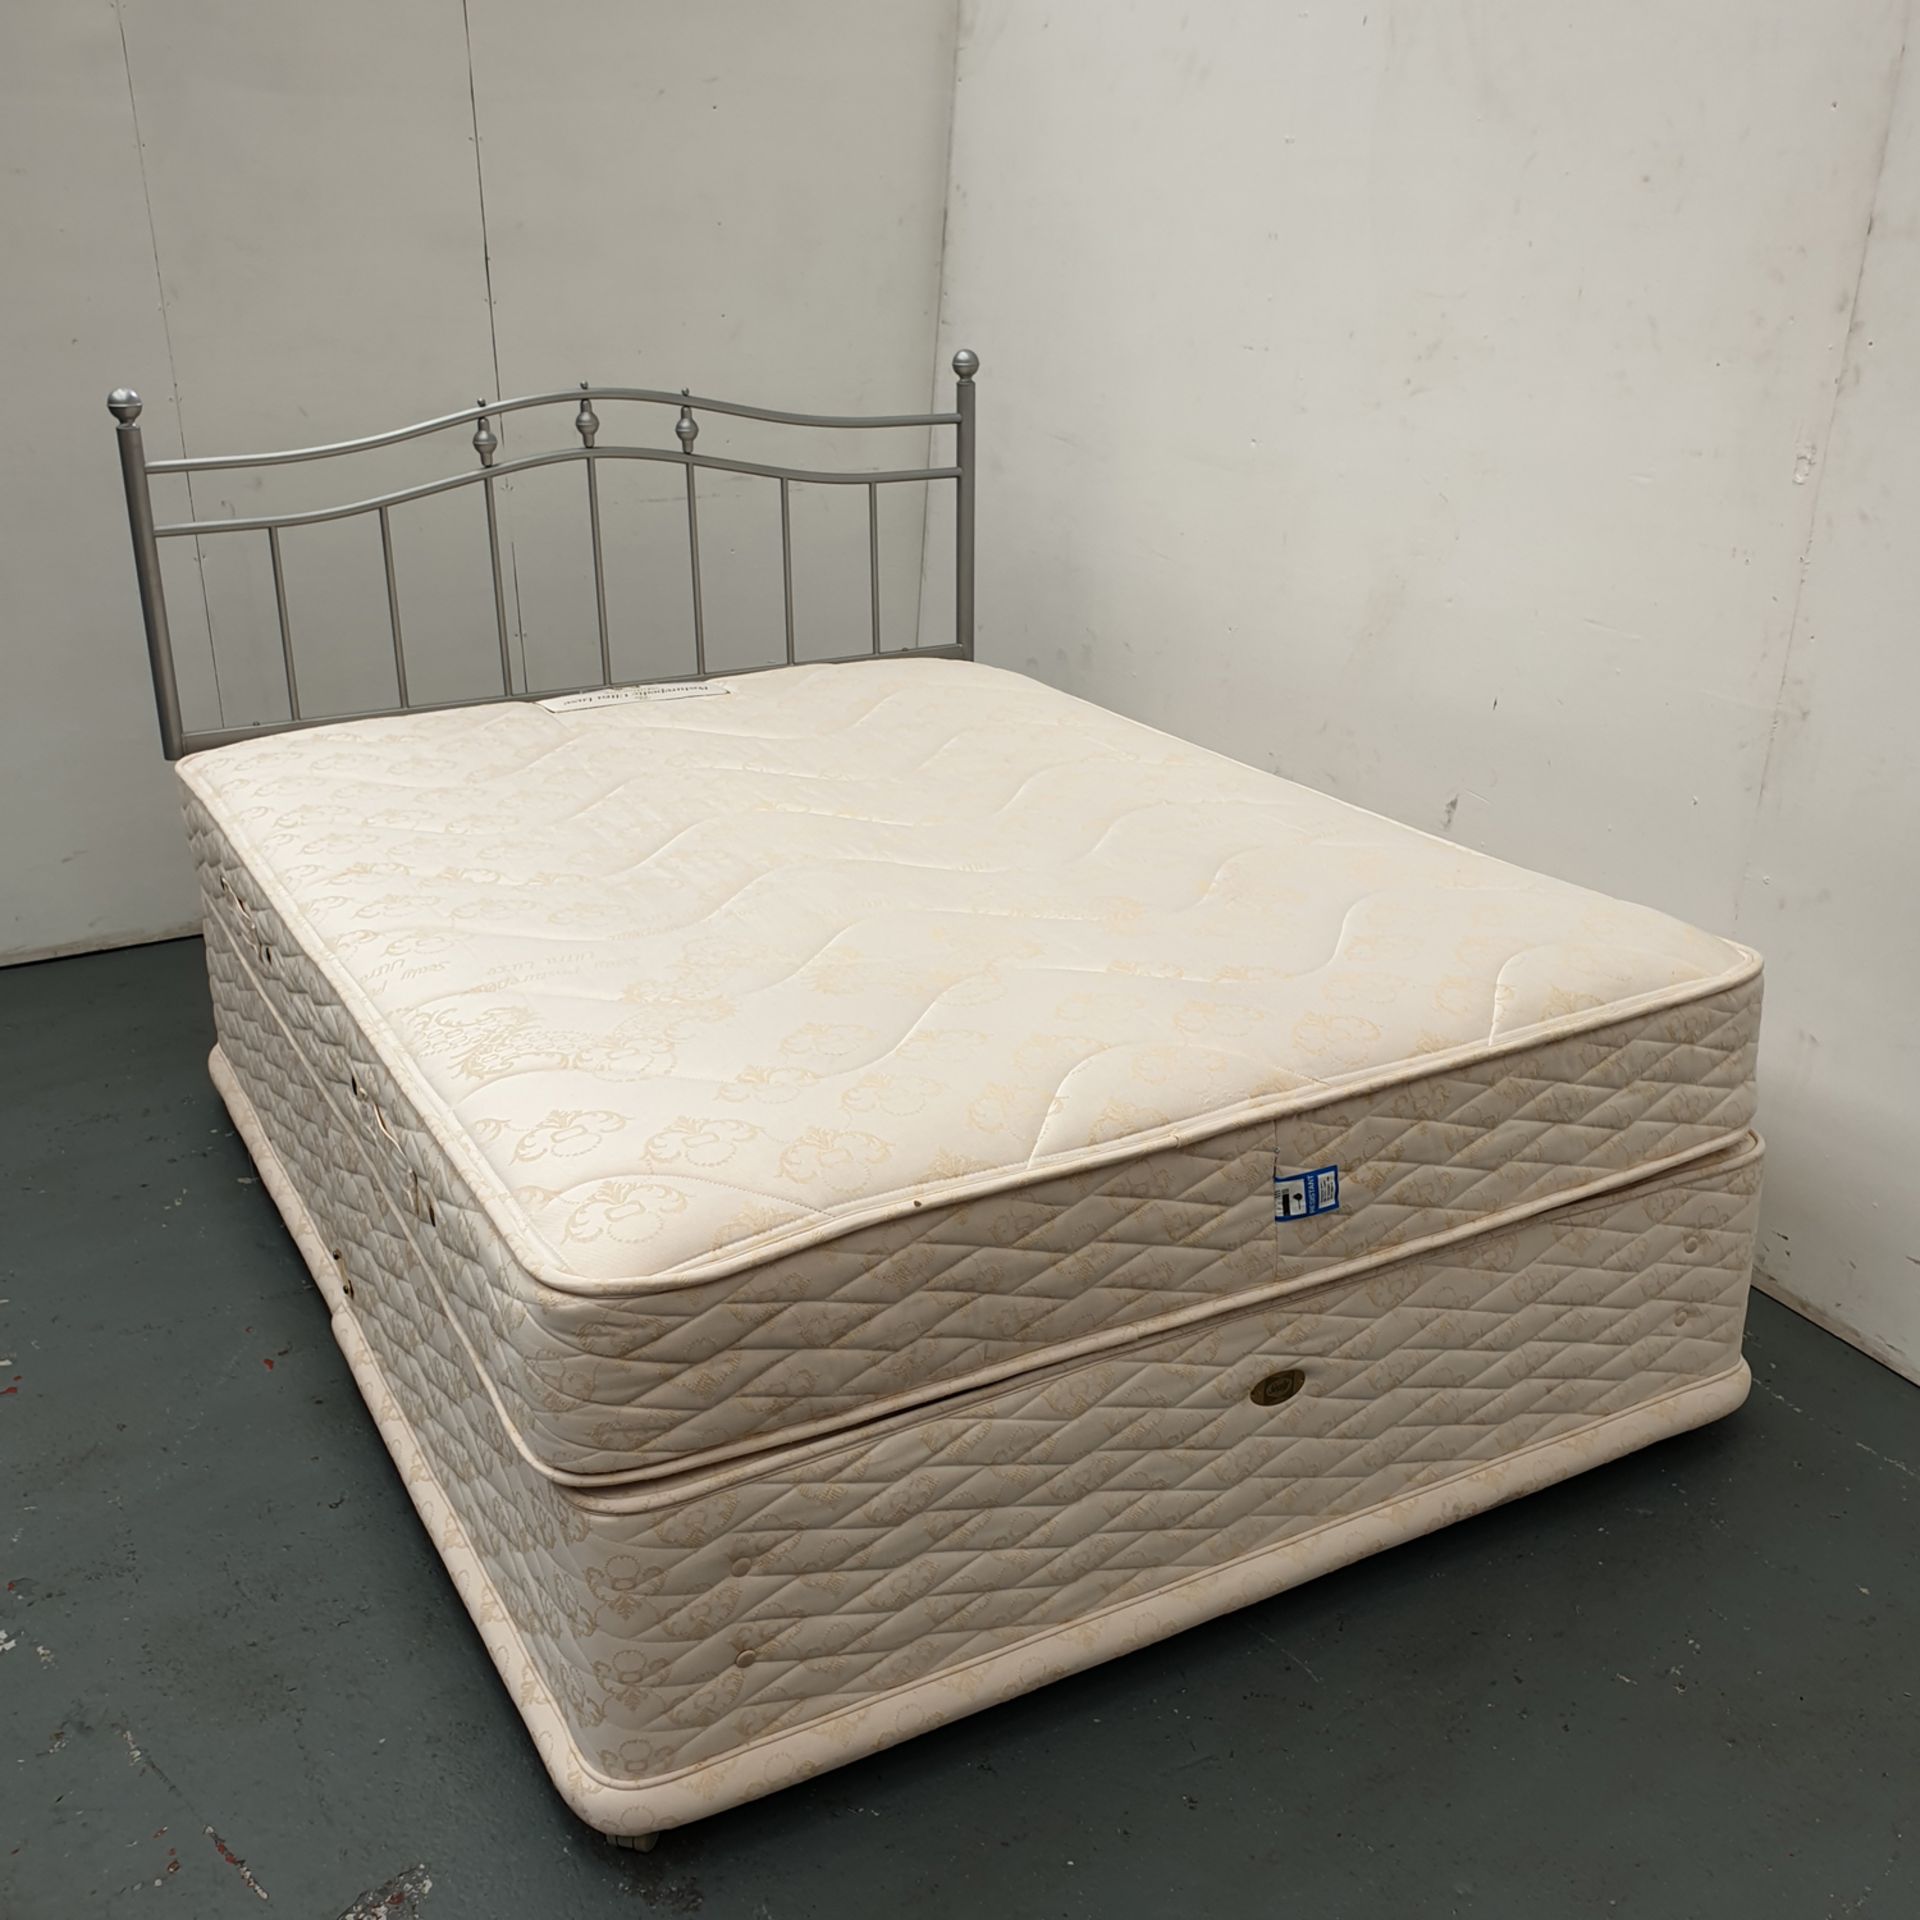 Duvan Bed with Mattress and Headboard. Approx Dimensions 2000mm x 1530mm x 660mm High. - Image 2 of 5